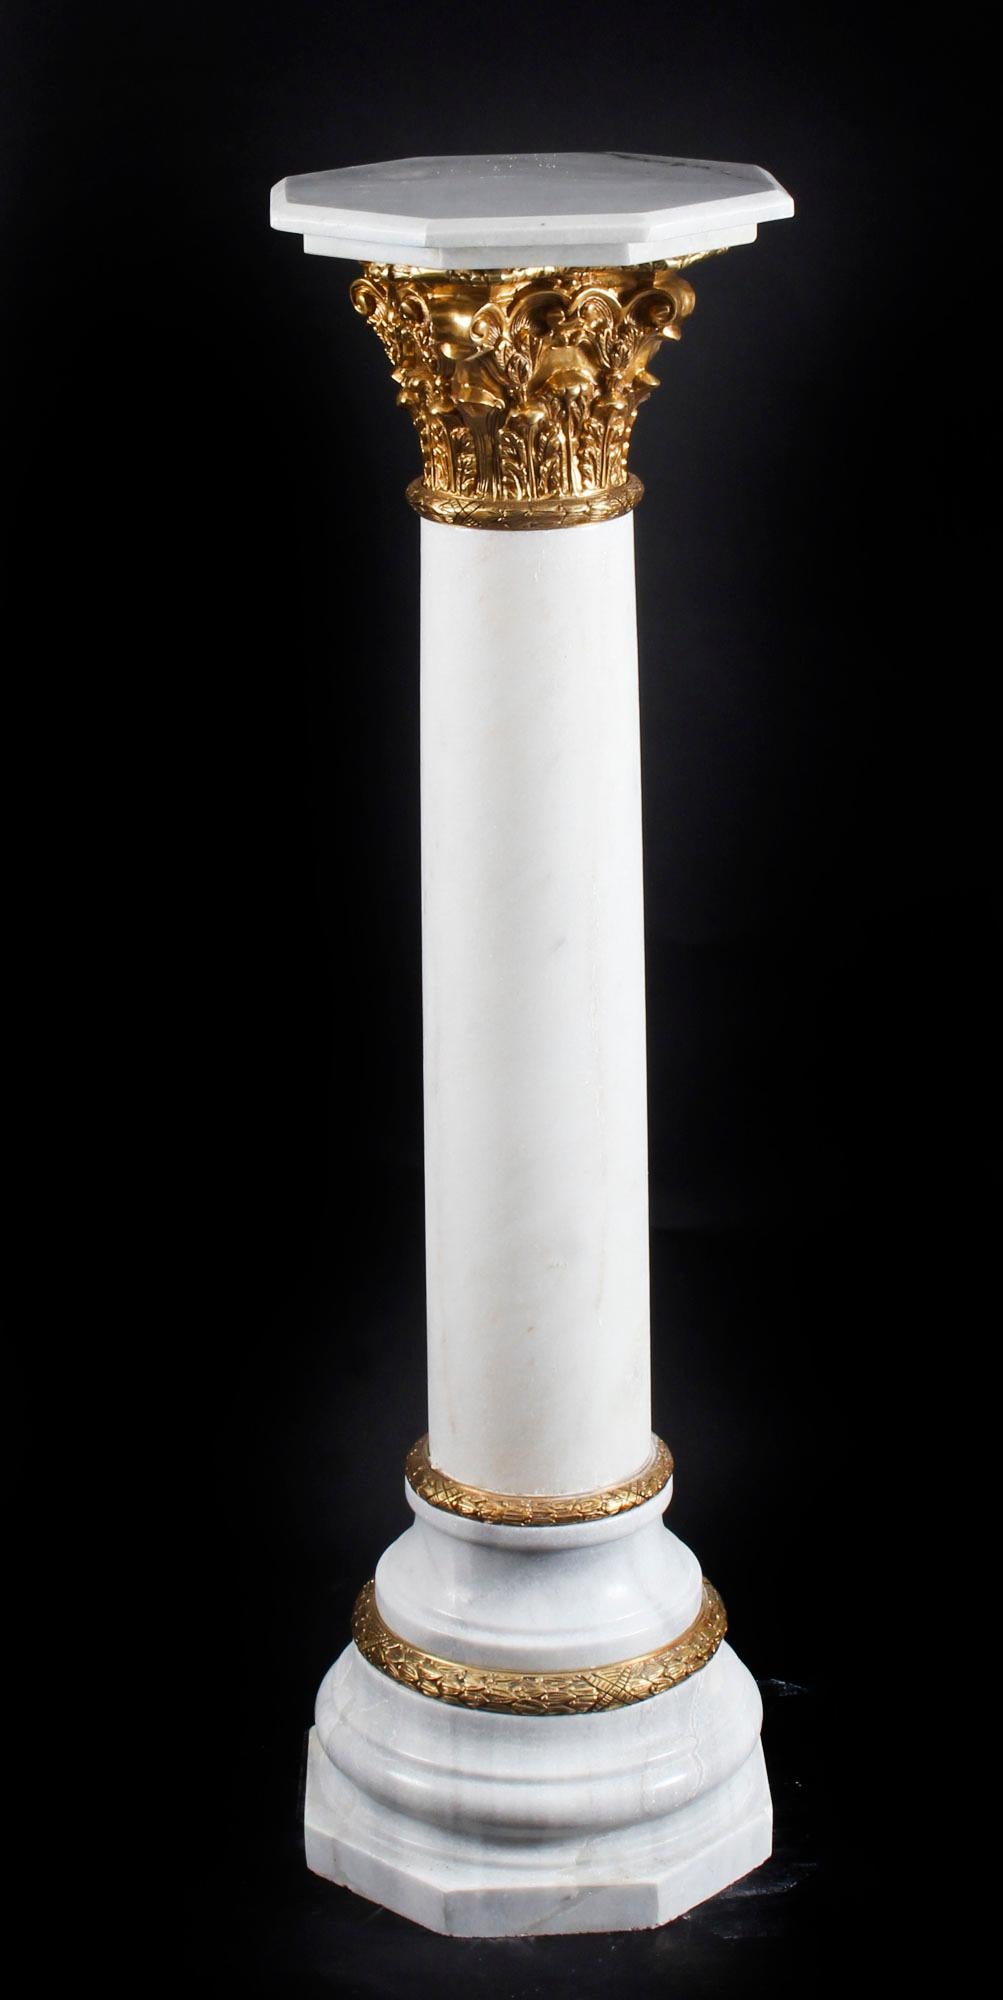 This is a gorgeous white marble Corinthian Column pedestal with gilded bronze 'ormolu' mounts, in classical Empire style. 

The pedestal is perfect for displaying bronzes, marble statues or porcelain vases and is sure to become the centrepiece of